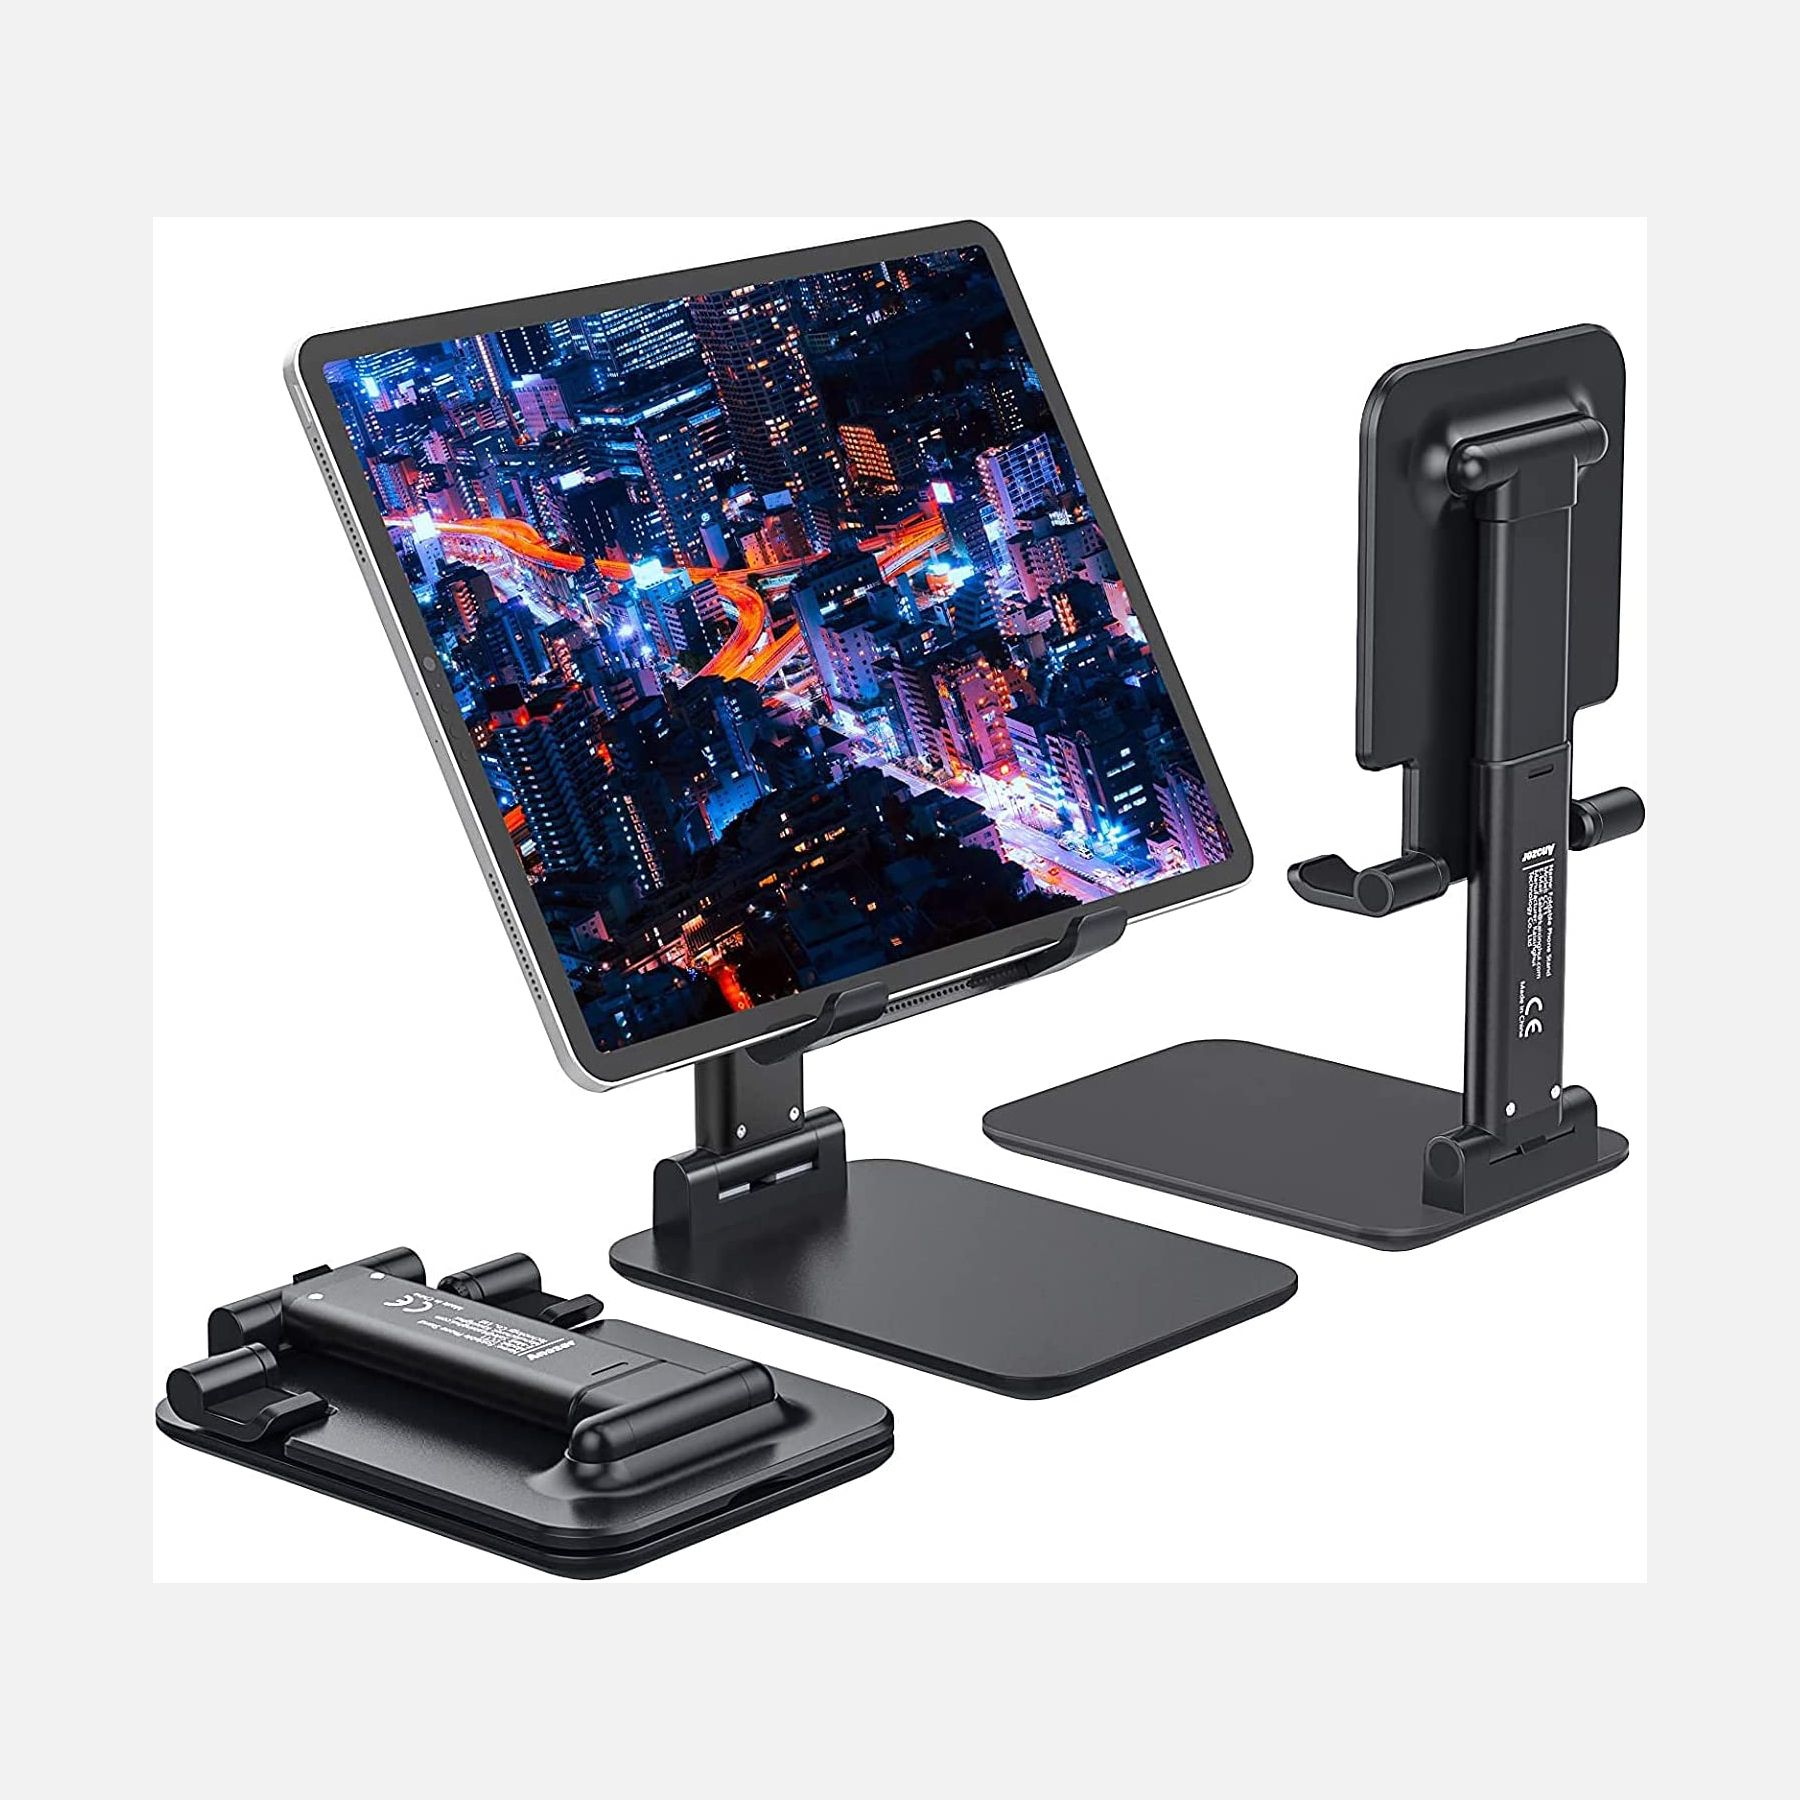 Anozer Portable Tablet Stand 01